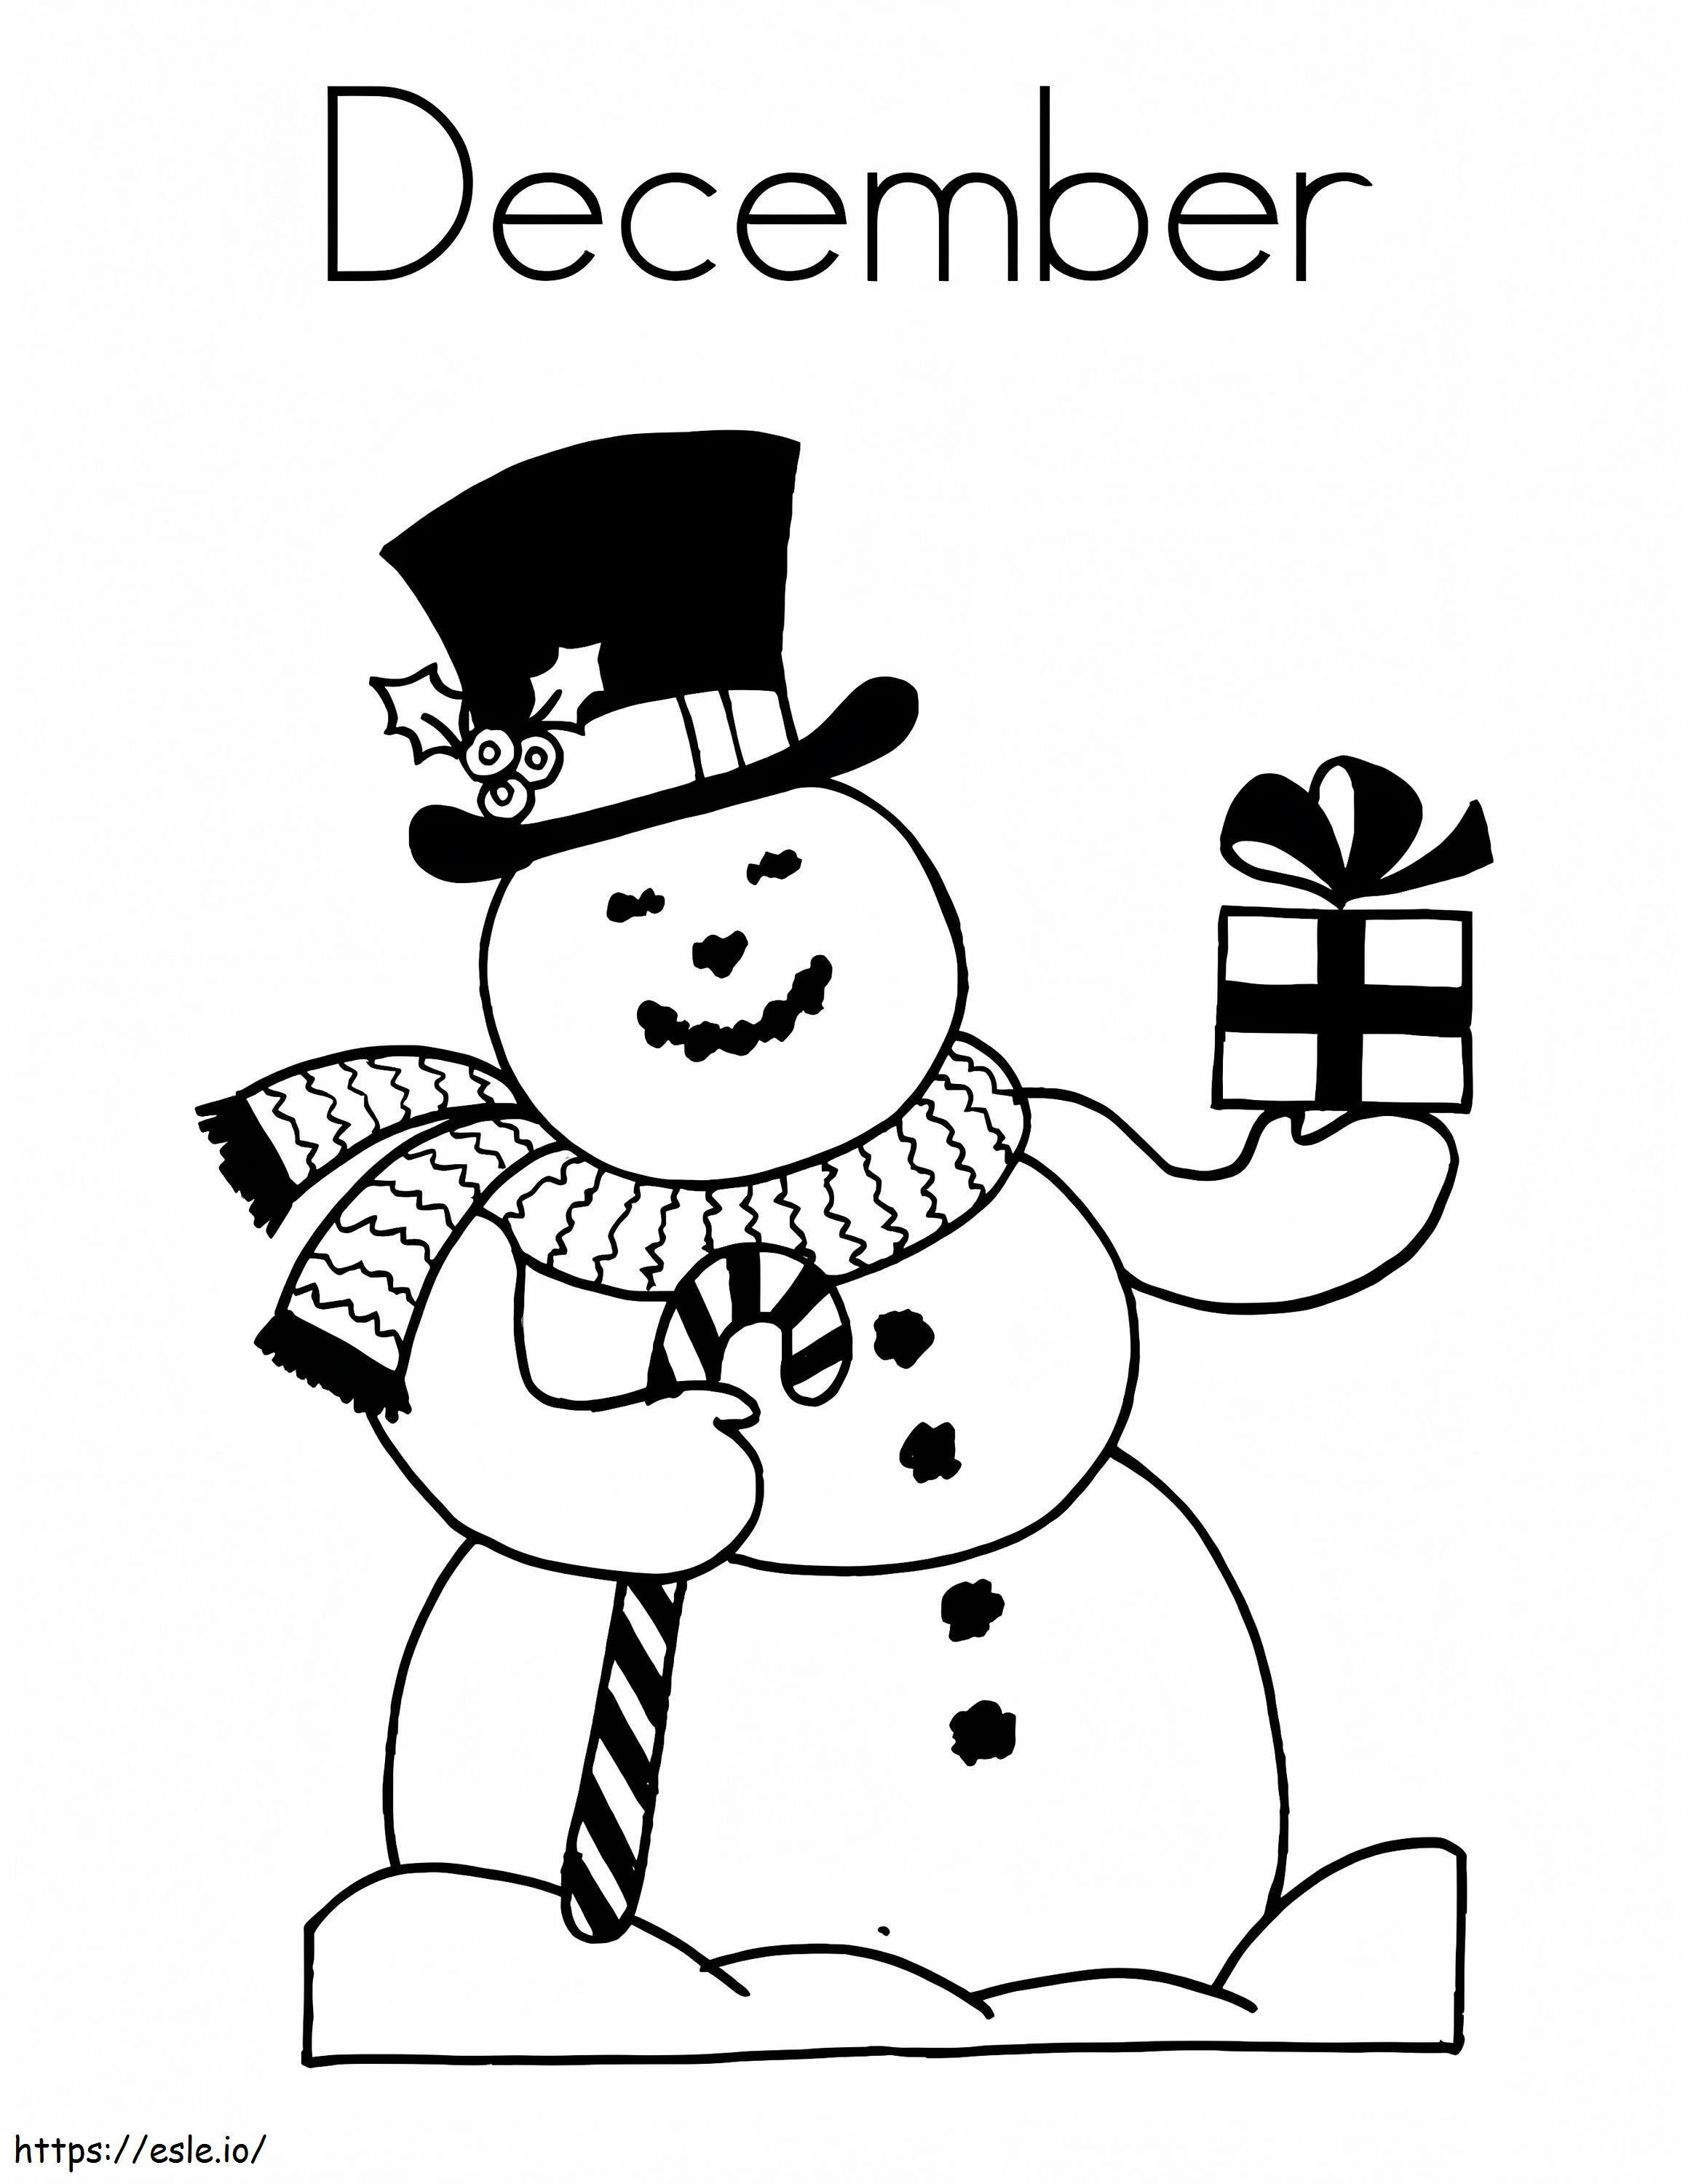 December 9 coloring page